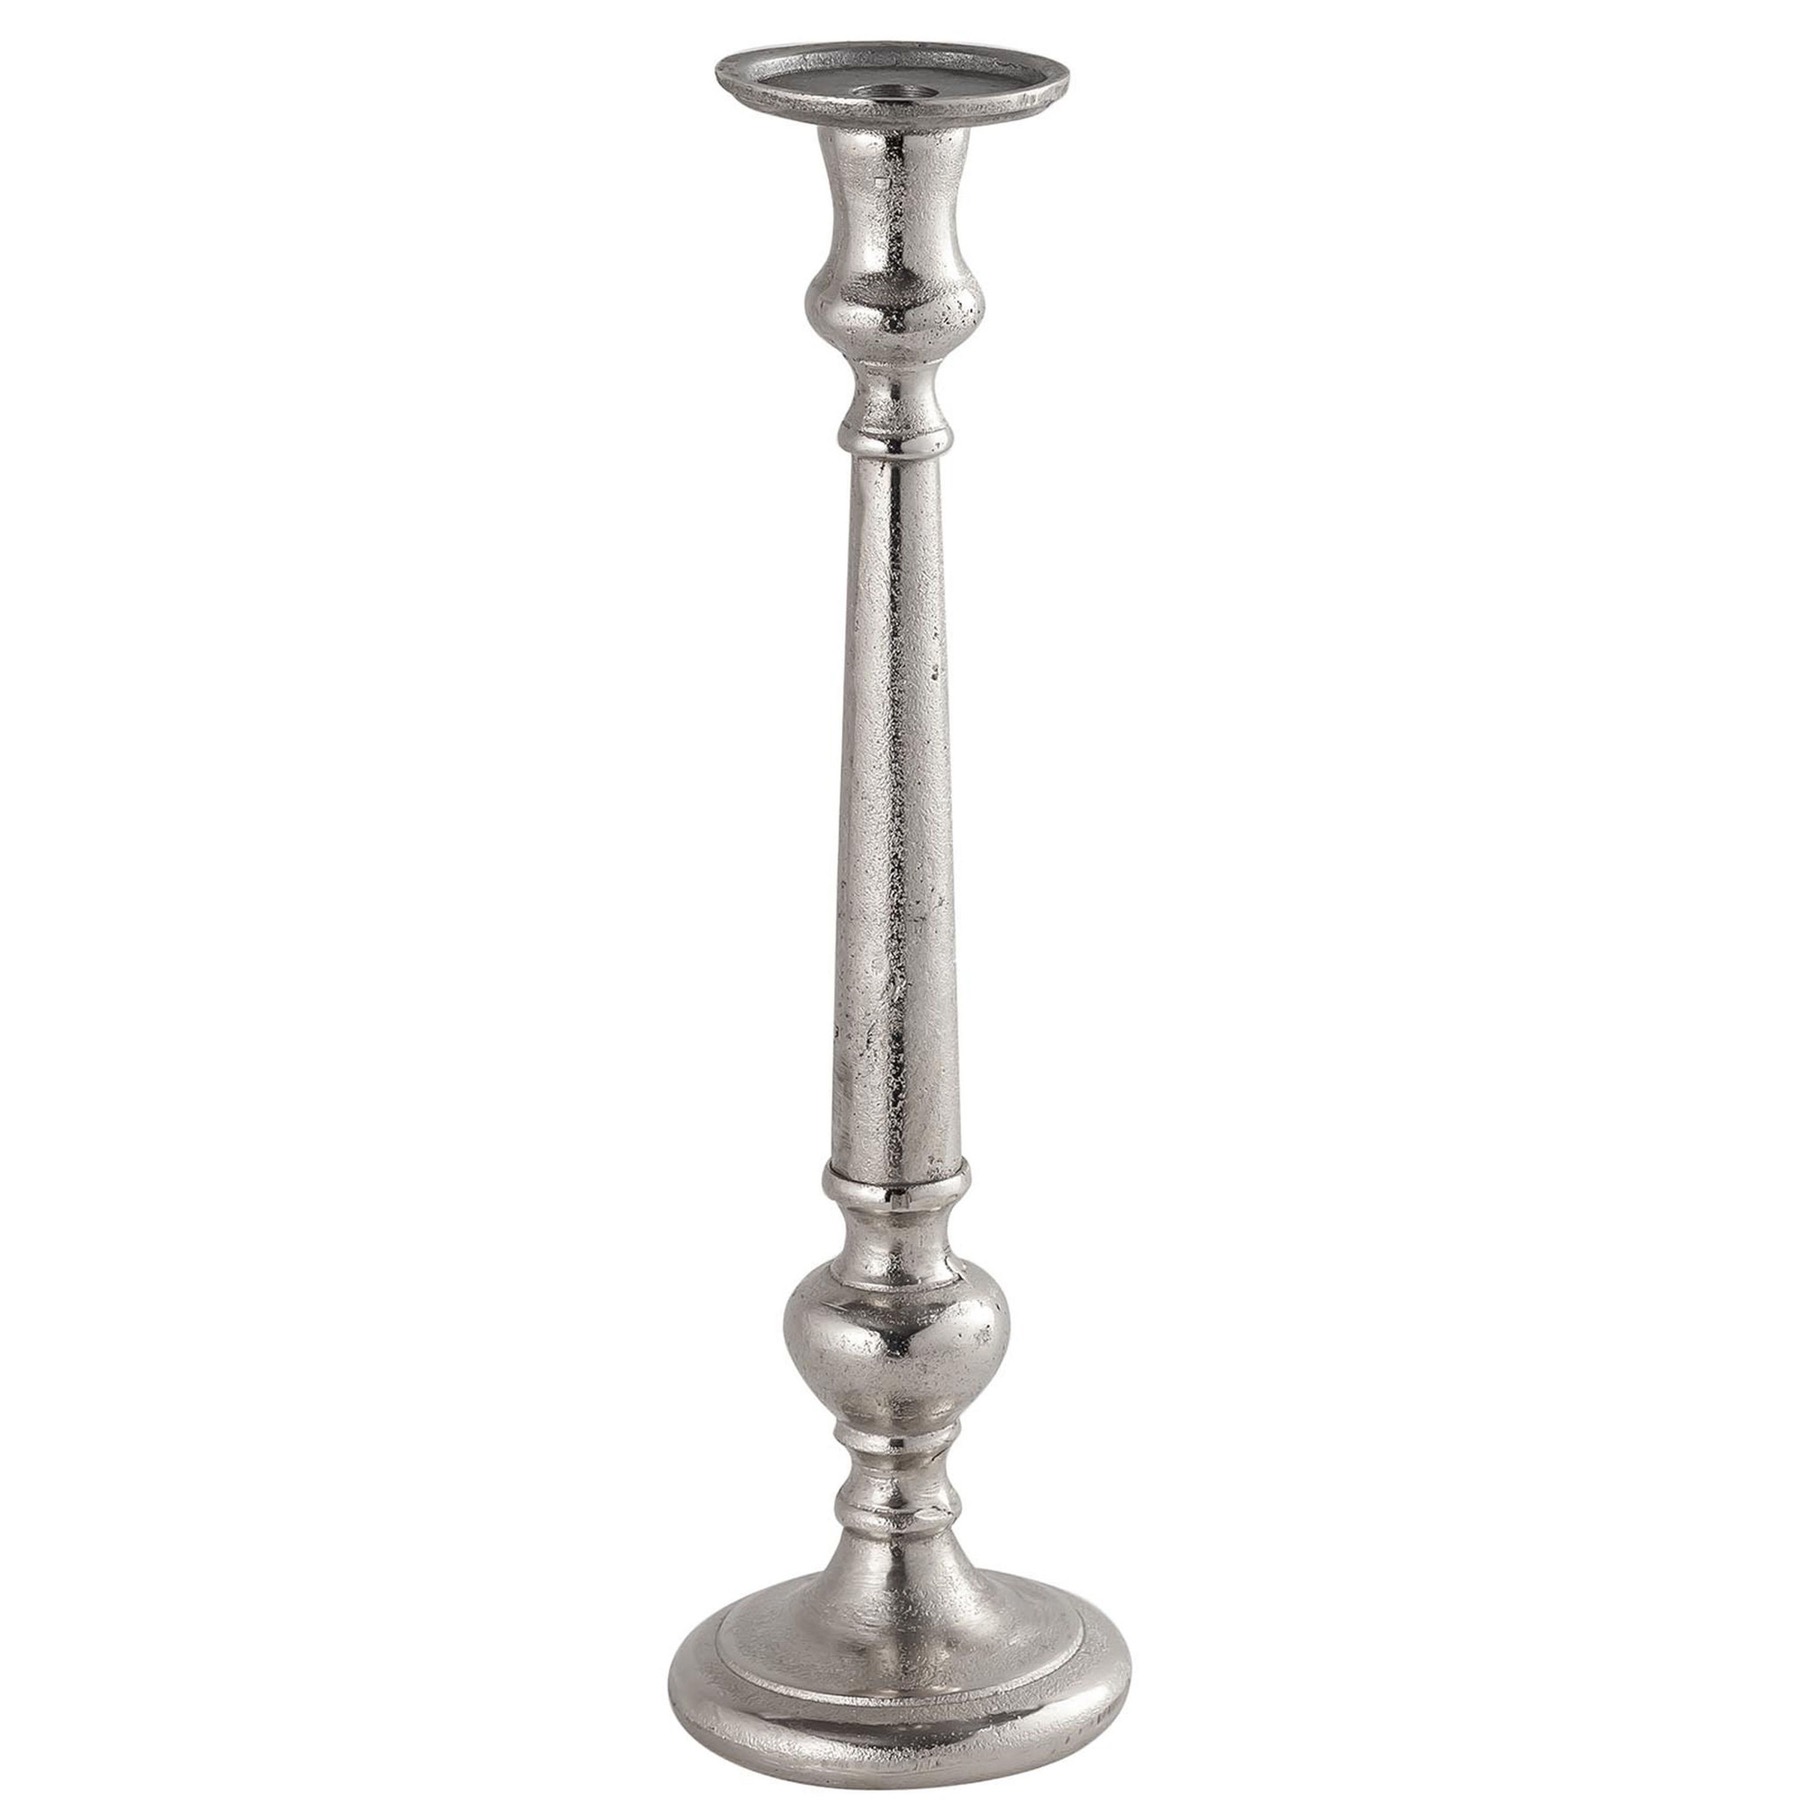 Farrah Collection Large Silver Dinner Candle Holder - Image 1